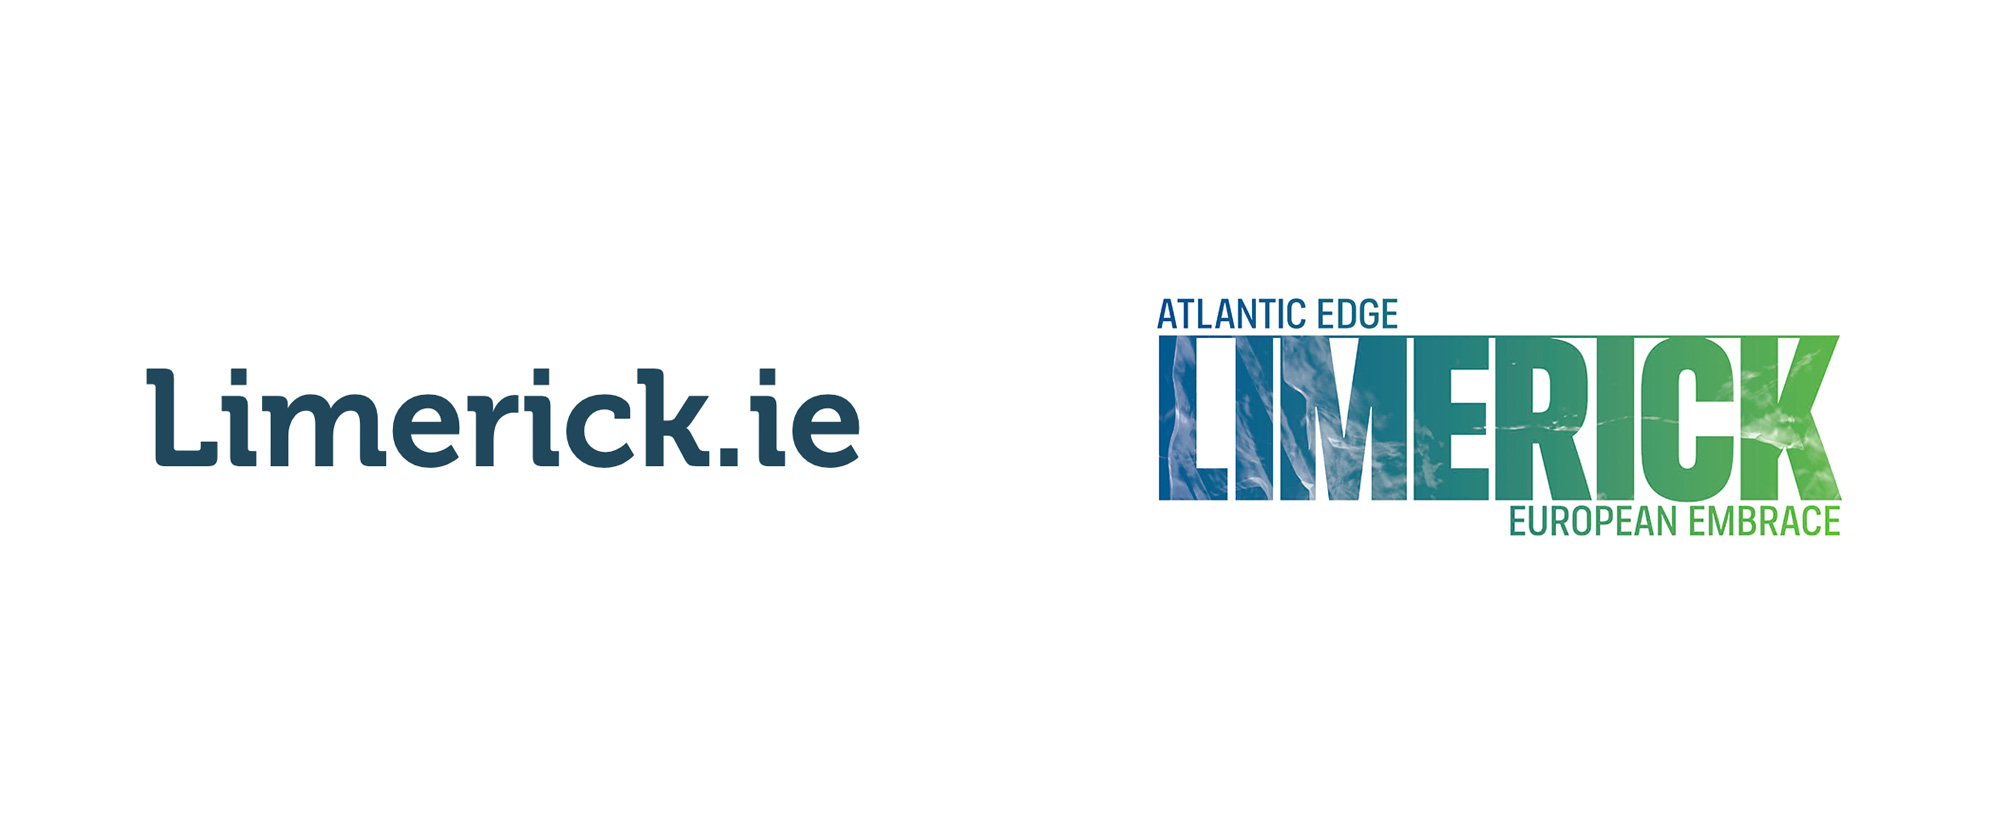 New Logo for Limerick by M&C Saatchi London